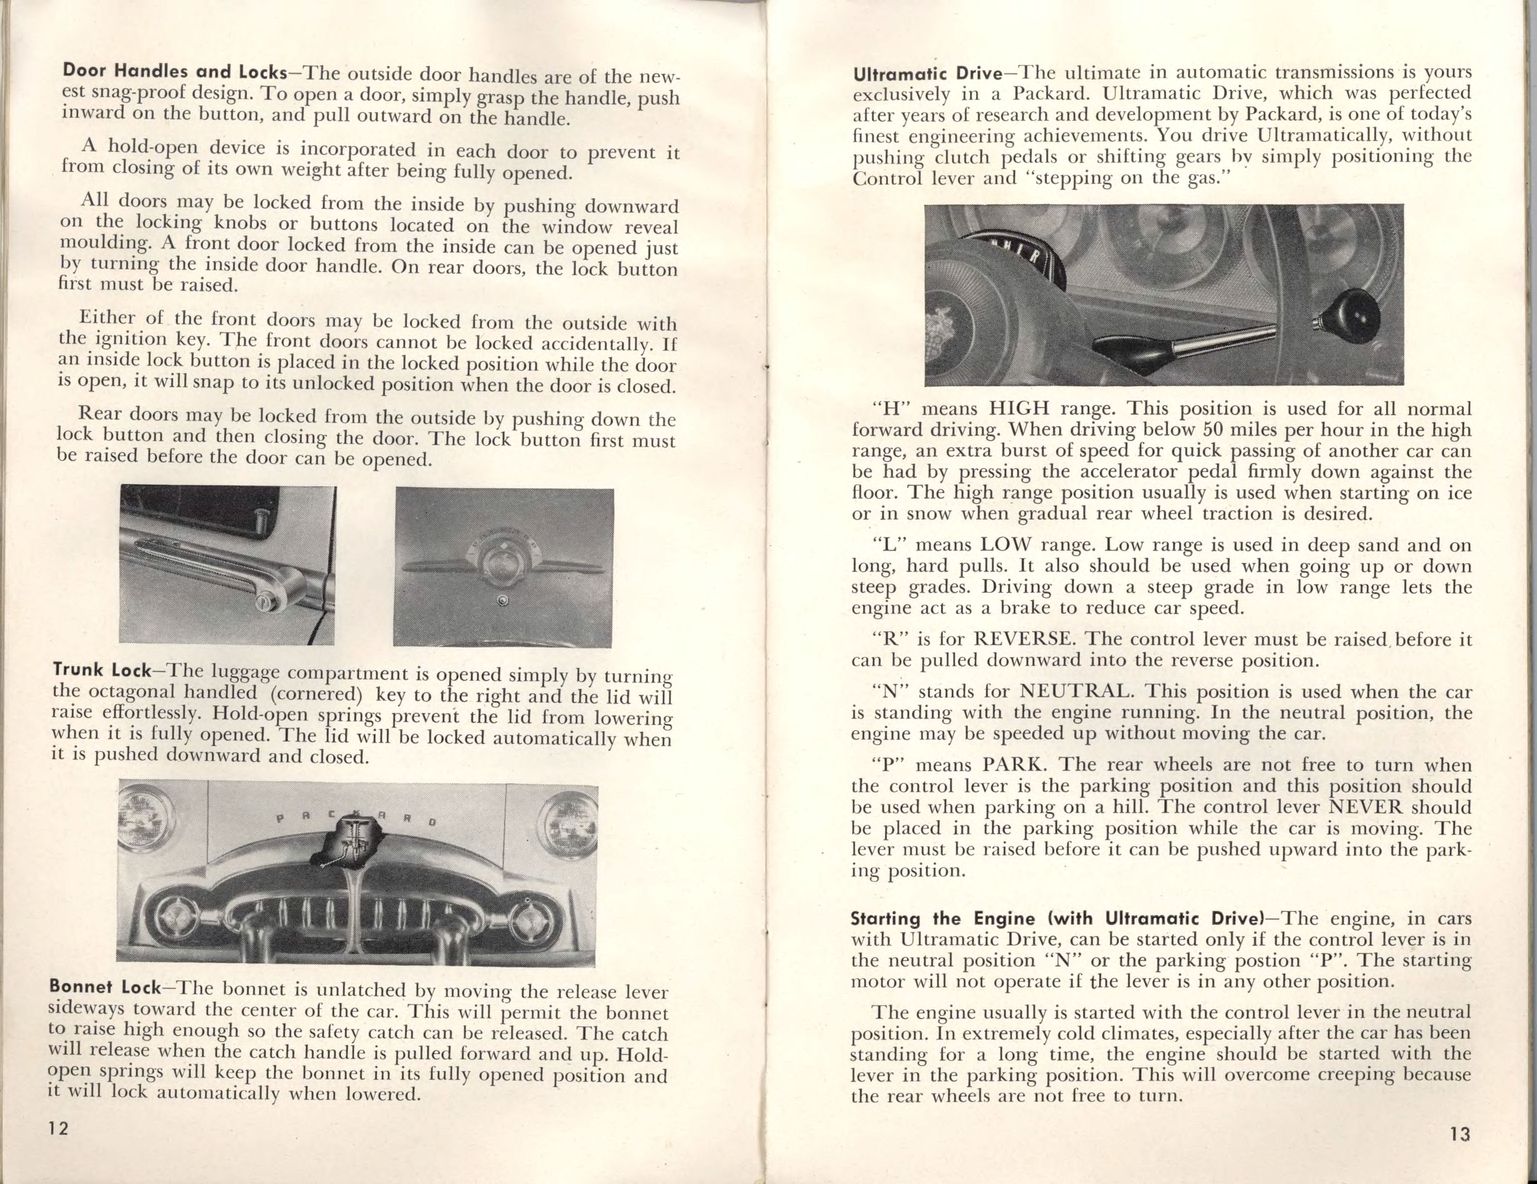 1951 Packard Owners Manual Page 5